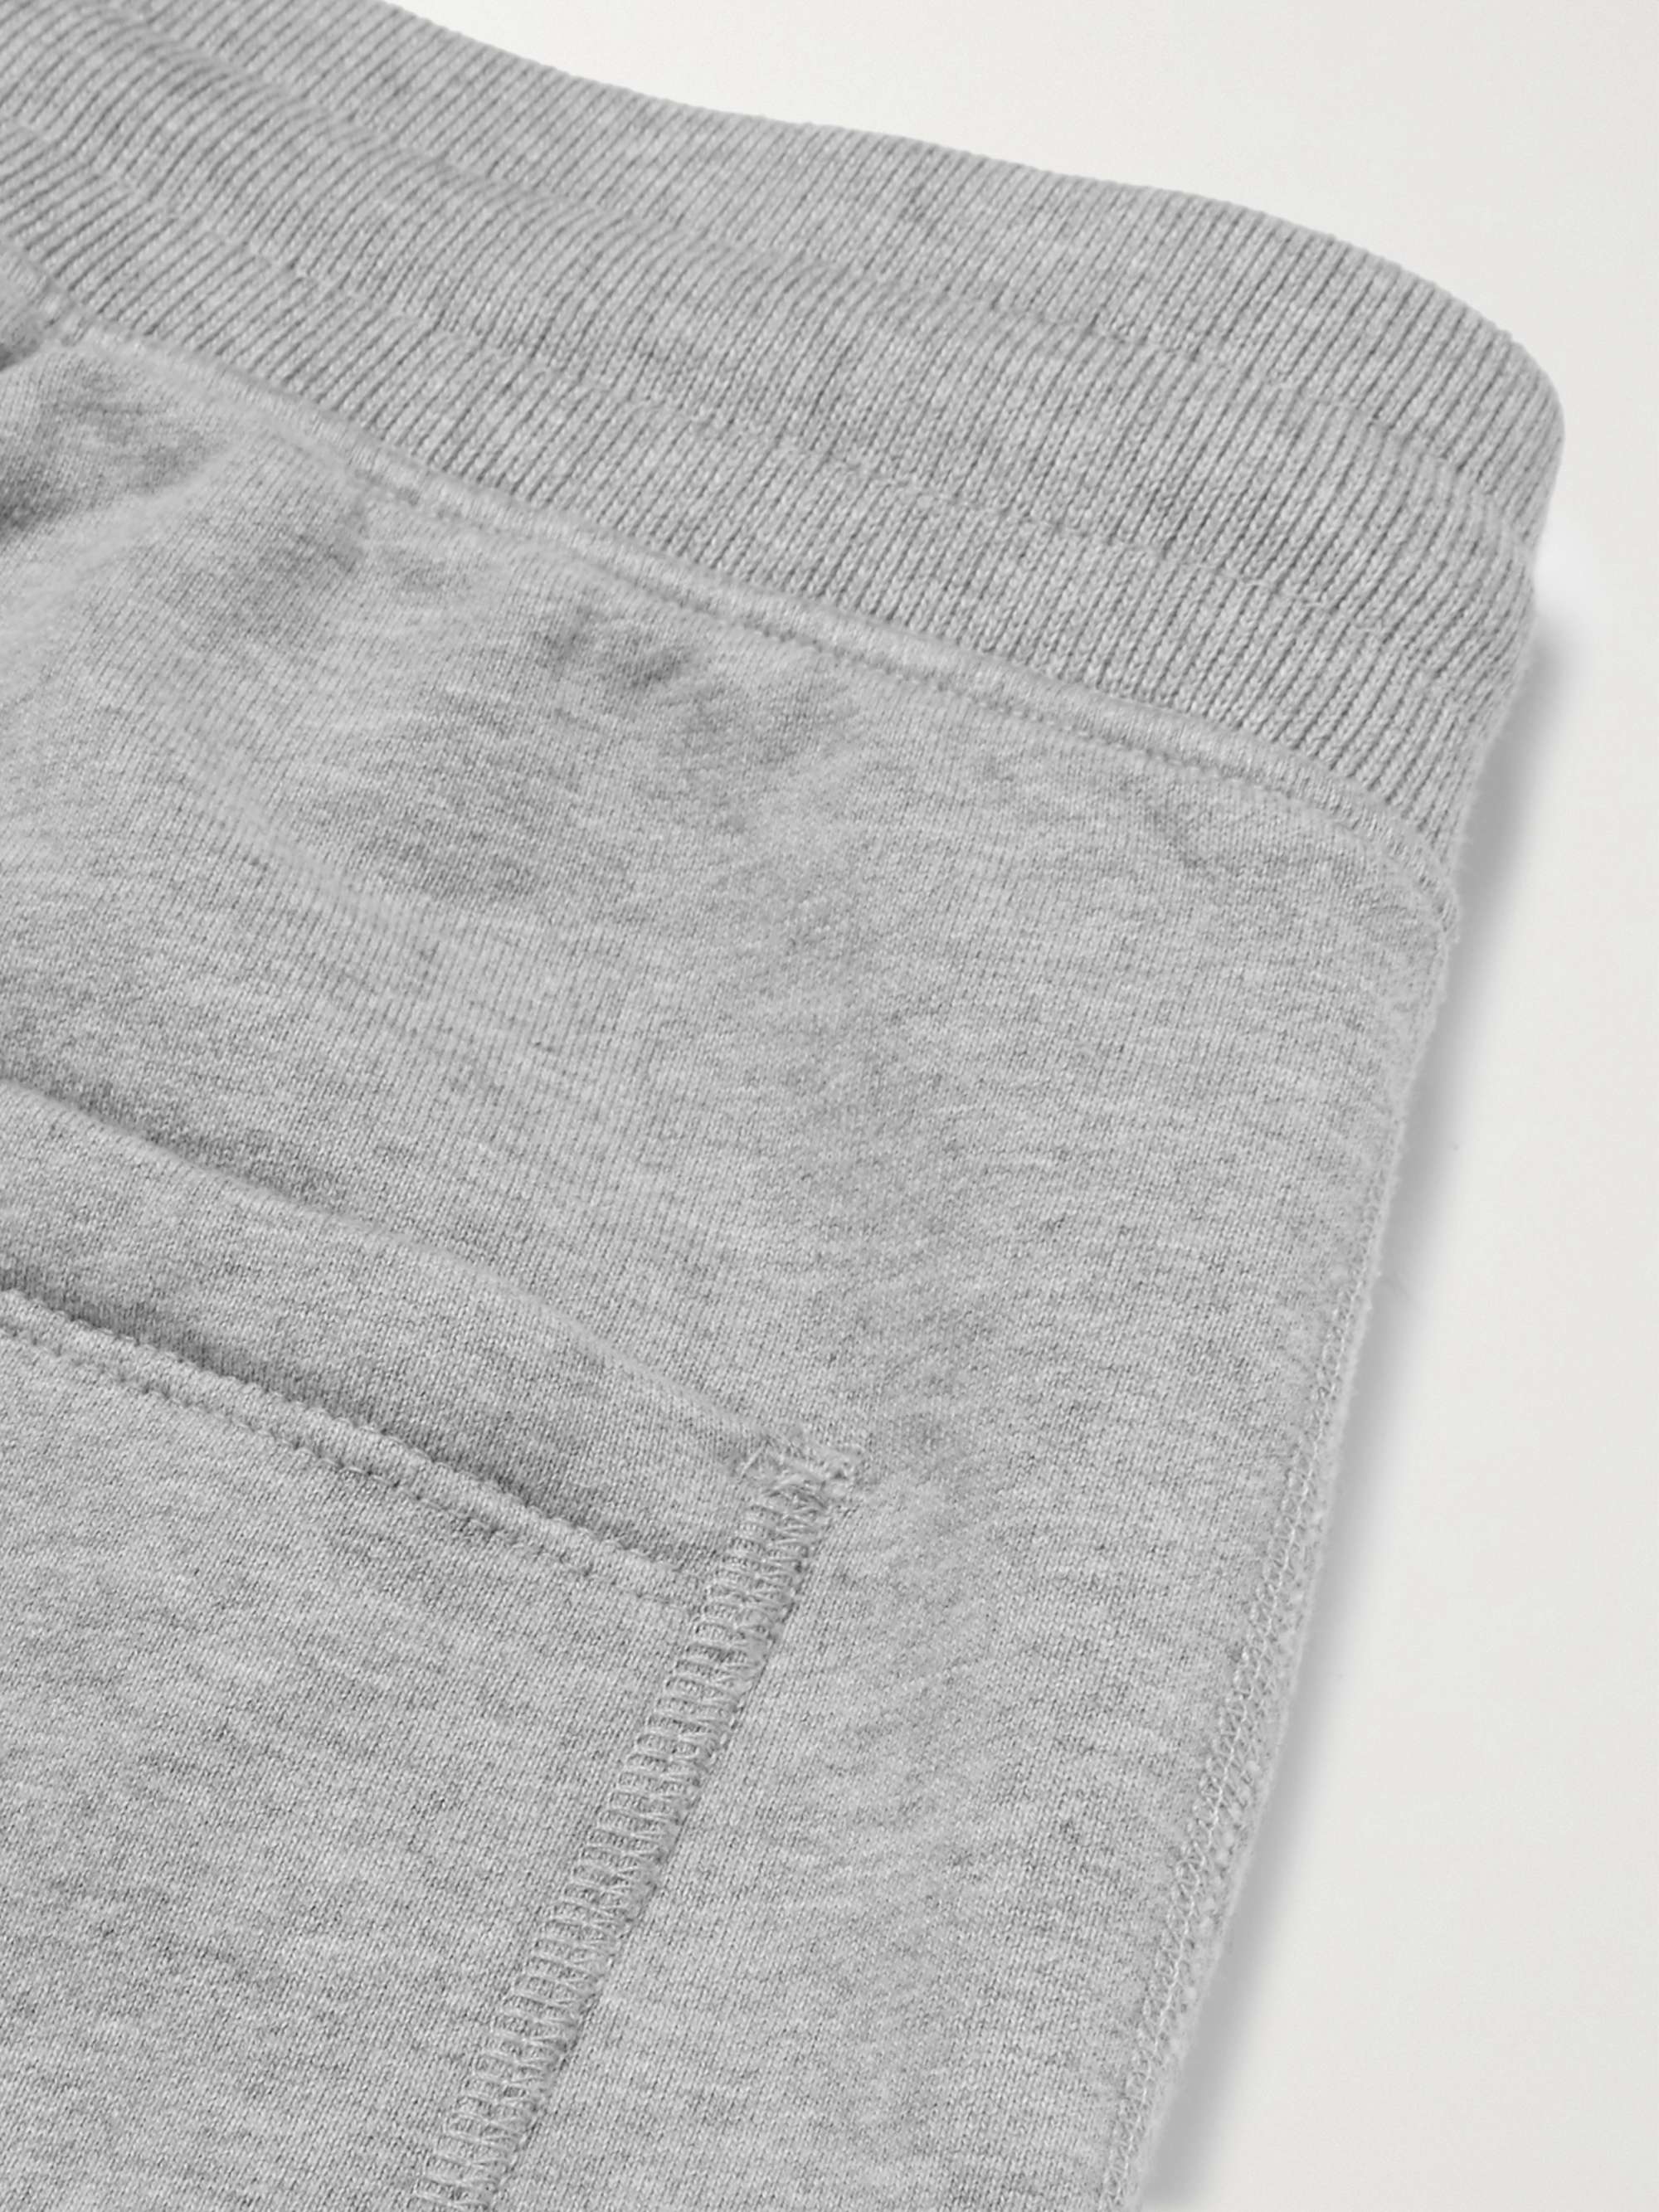 REIGNING CHAMP Slim-Fit Tapered Pima Cotton-Jersey Sweatpants